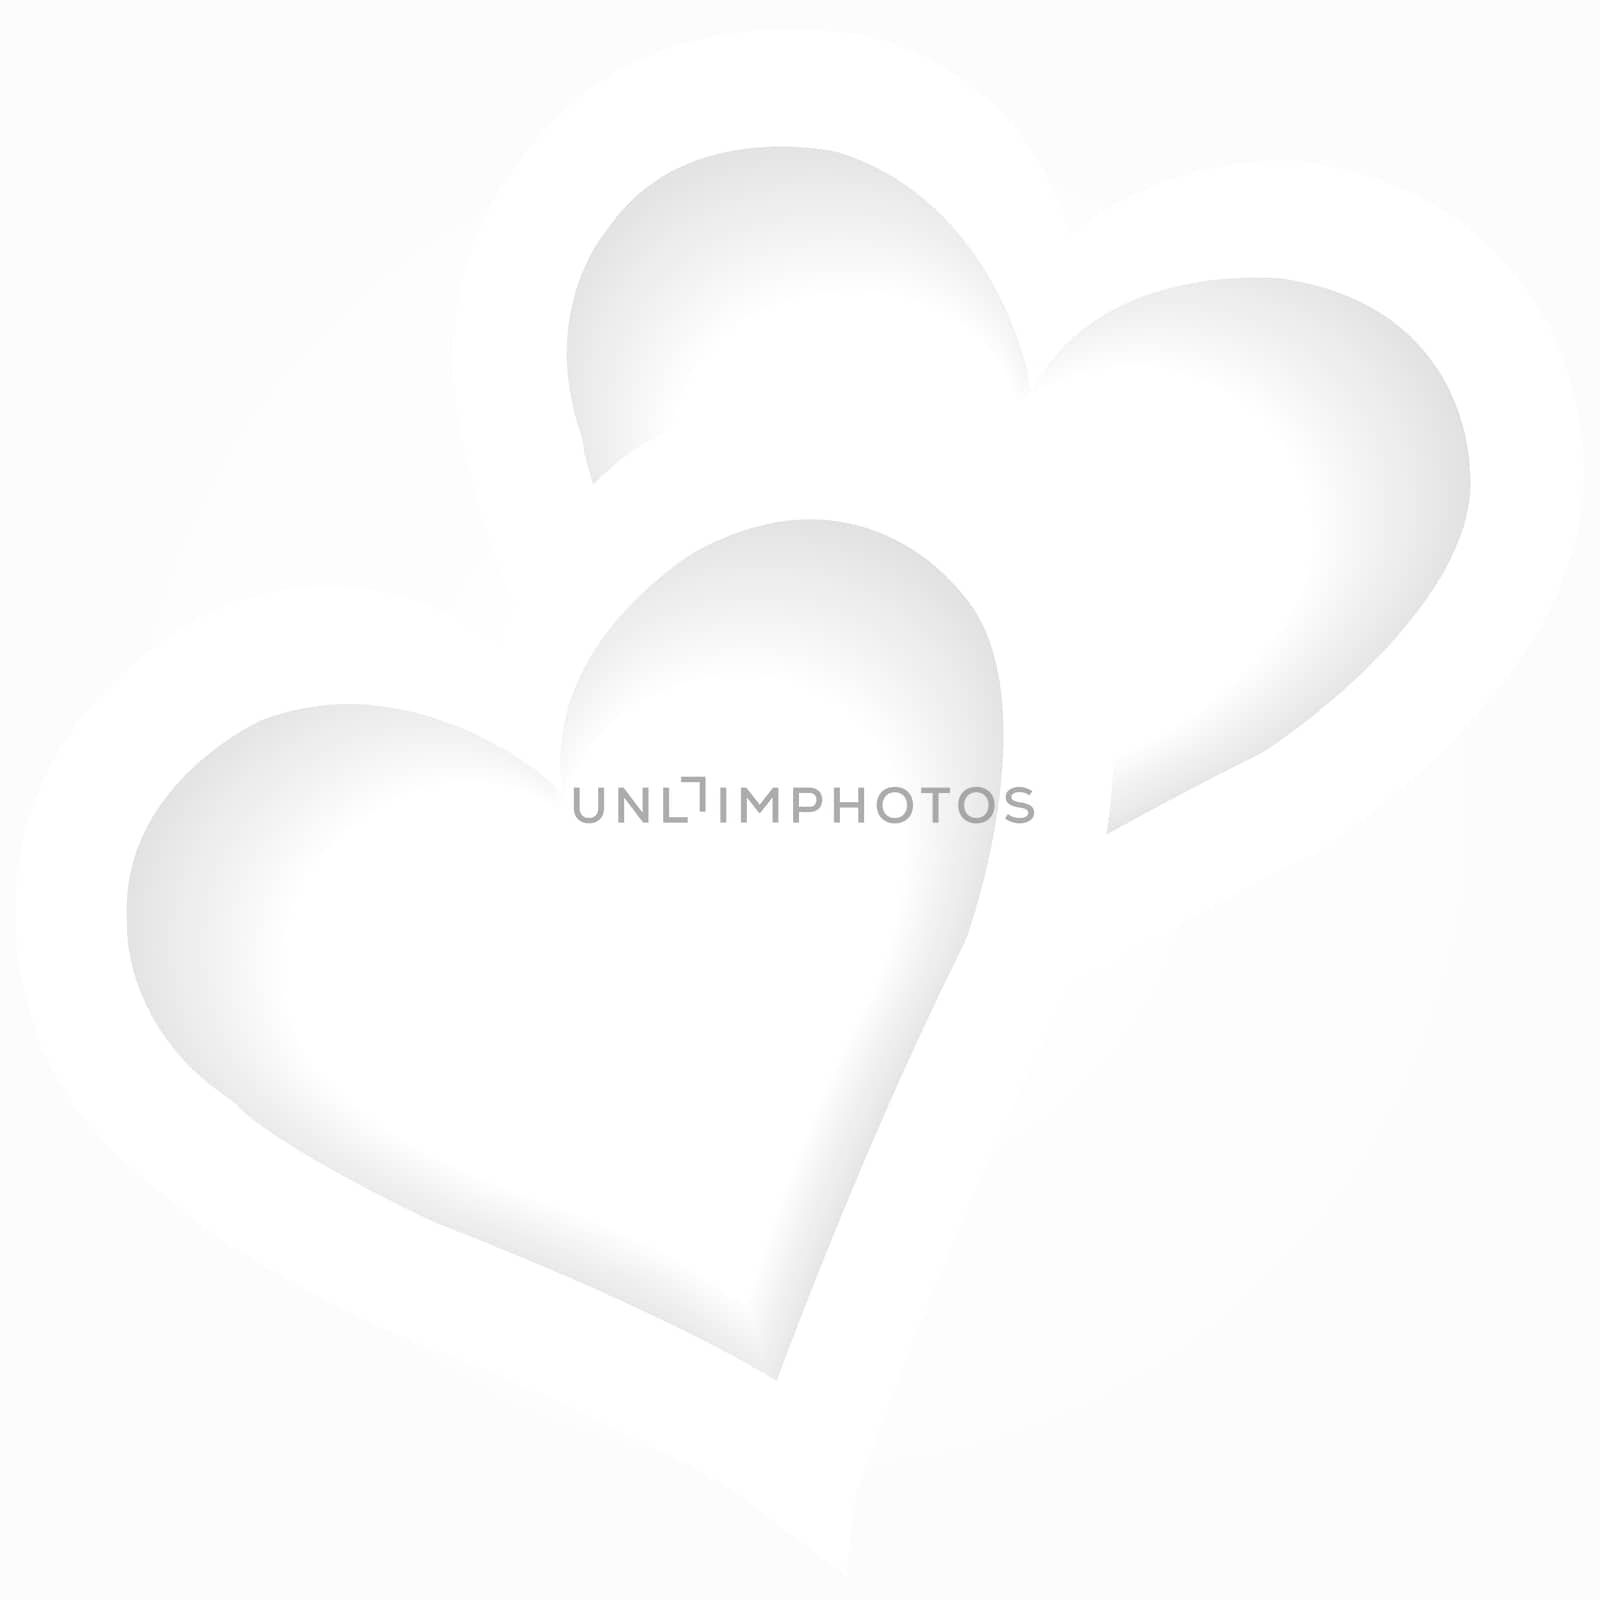 Two white hearts, romantic background by hibrida13